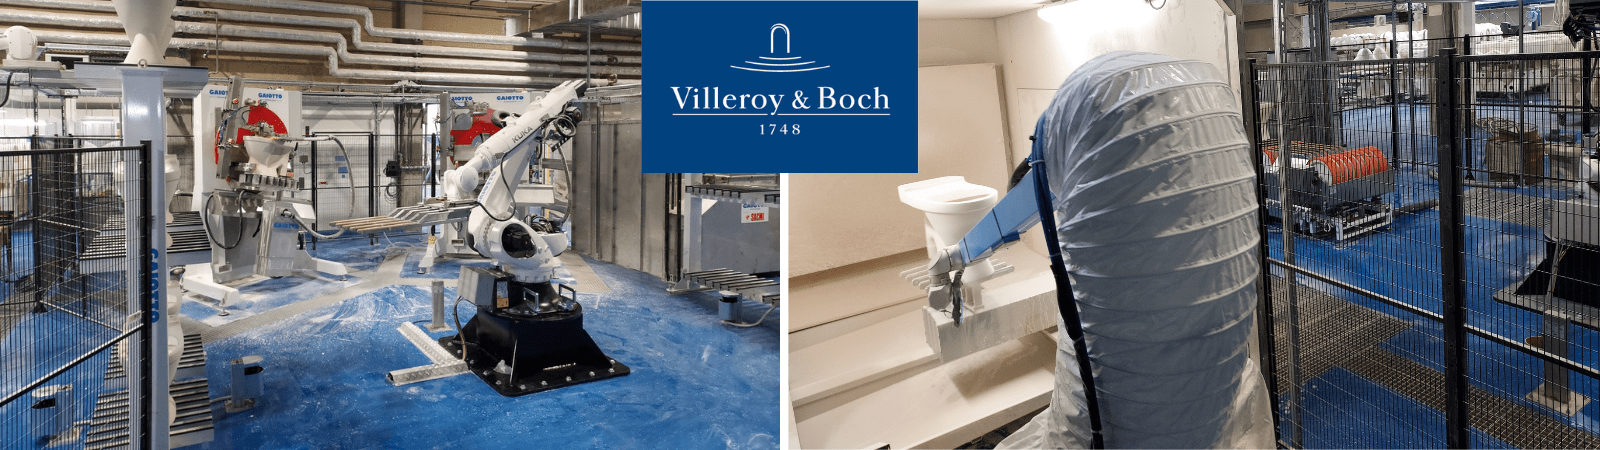 Handling and glazing 4.0 with SACMI for Villeroy & Boch Hungary